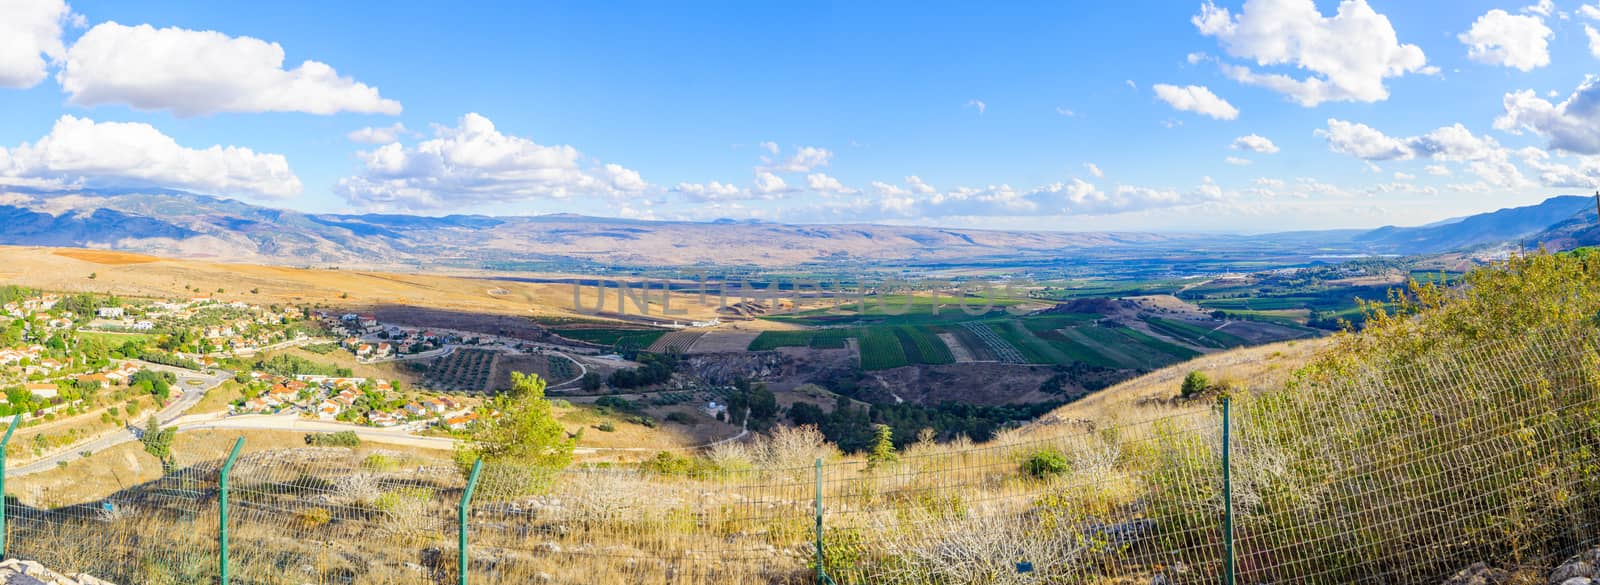 Metula, and nearby landscape, Israel border with Lebanon by RnDmS